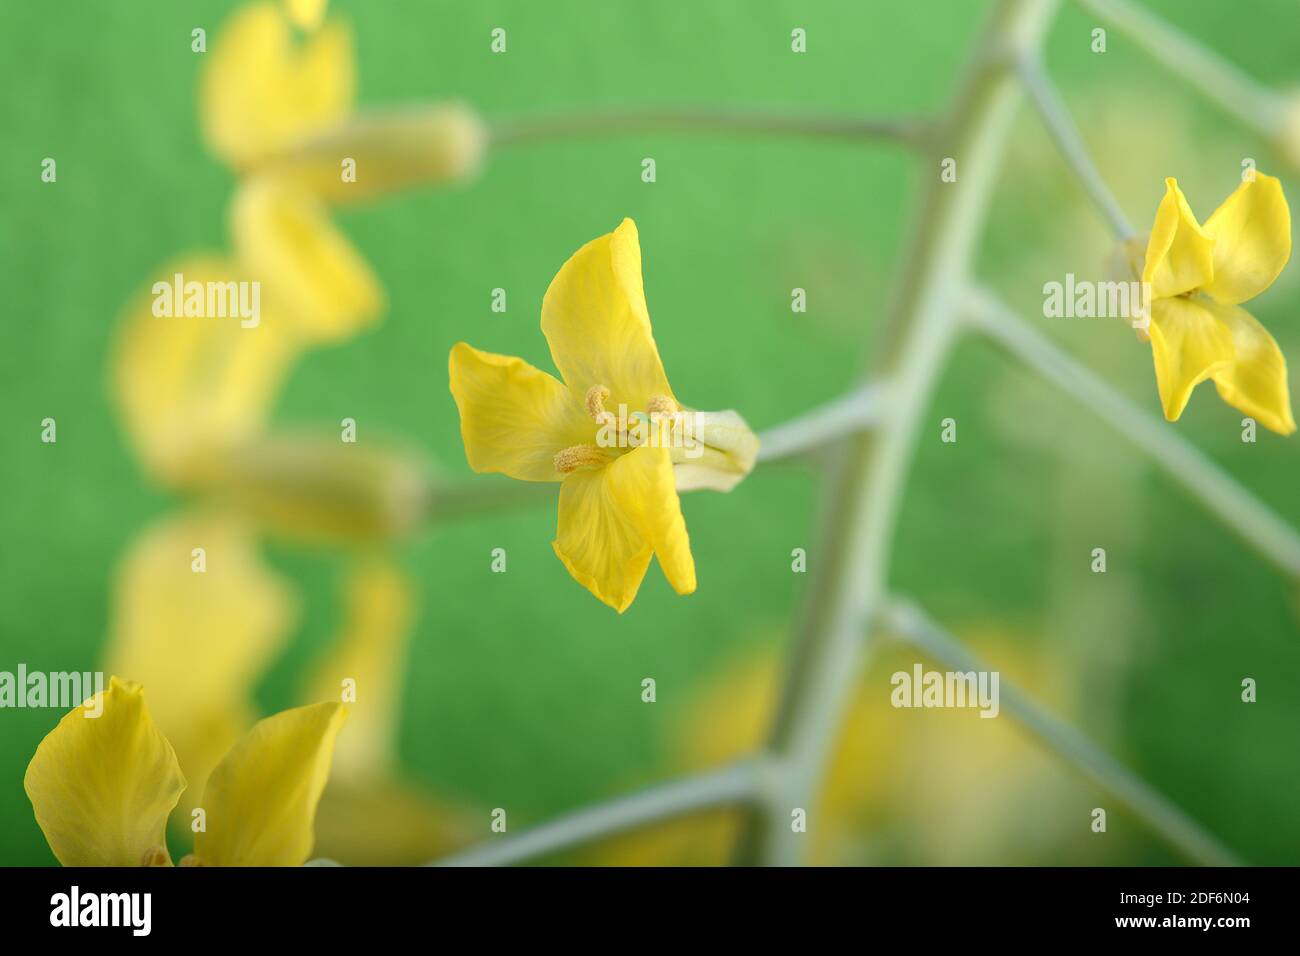 Art wild spring flowers close up. Yellow flower on green background Stock Photo